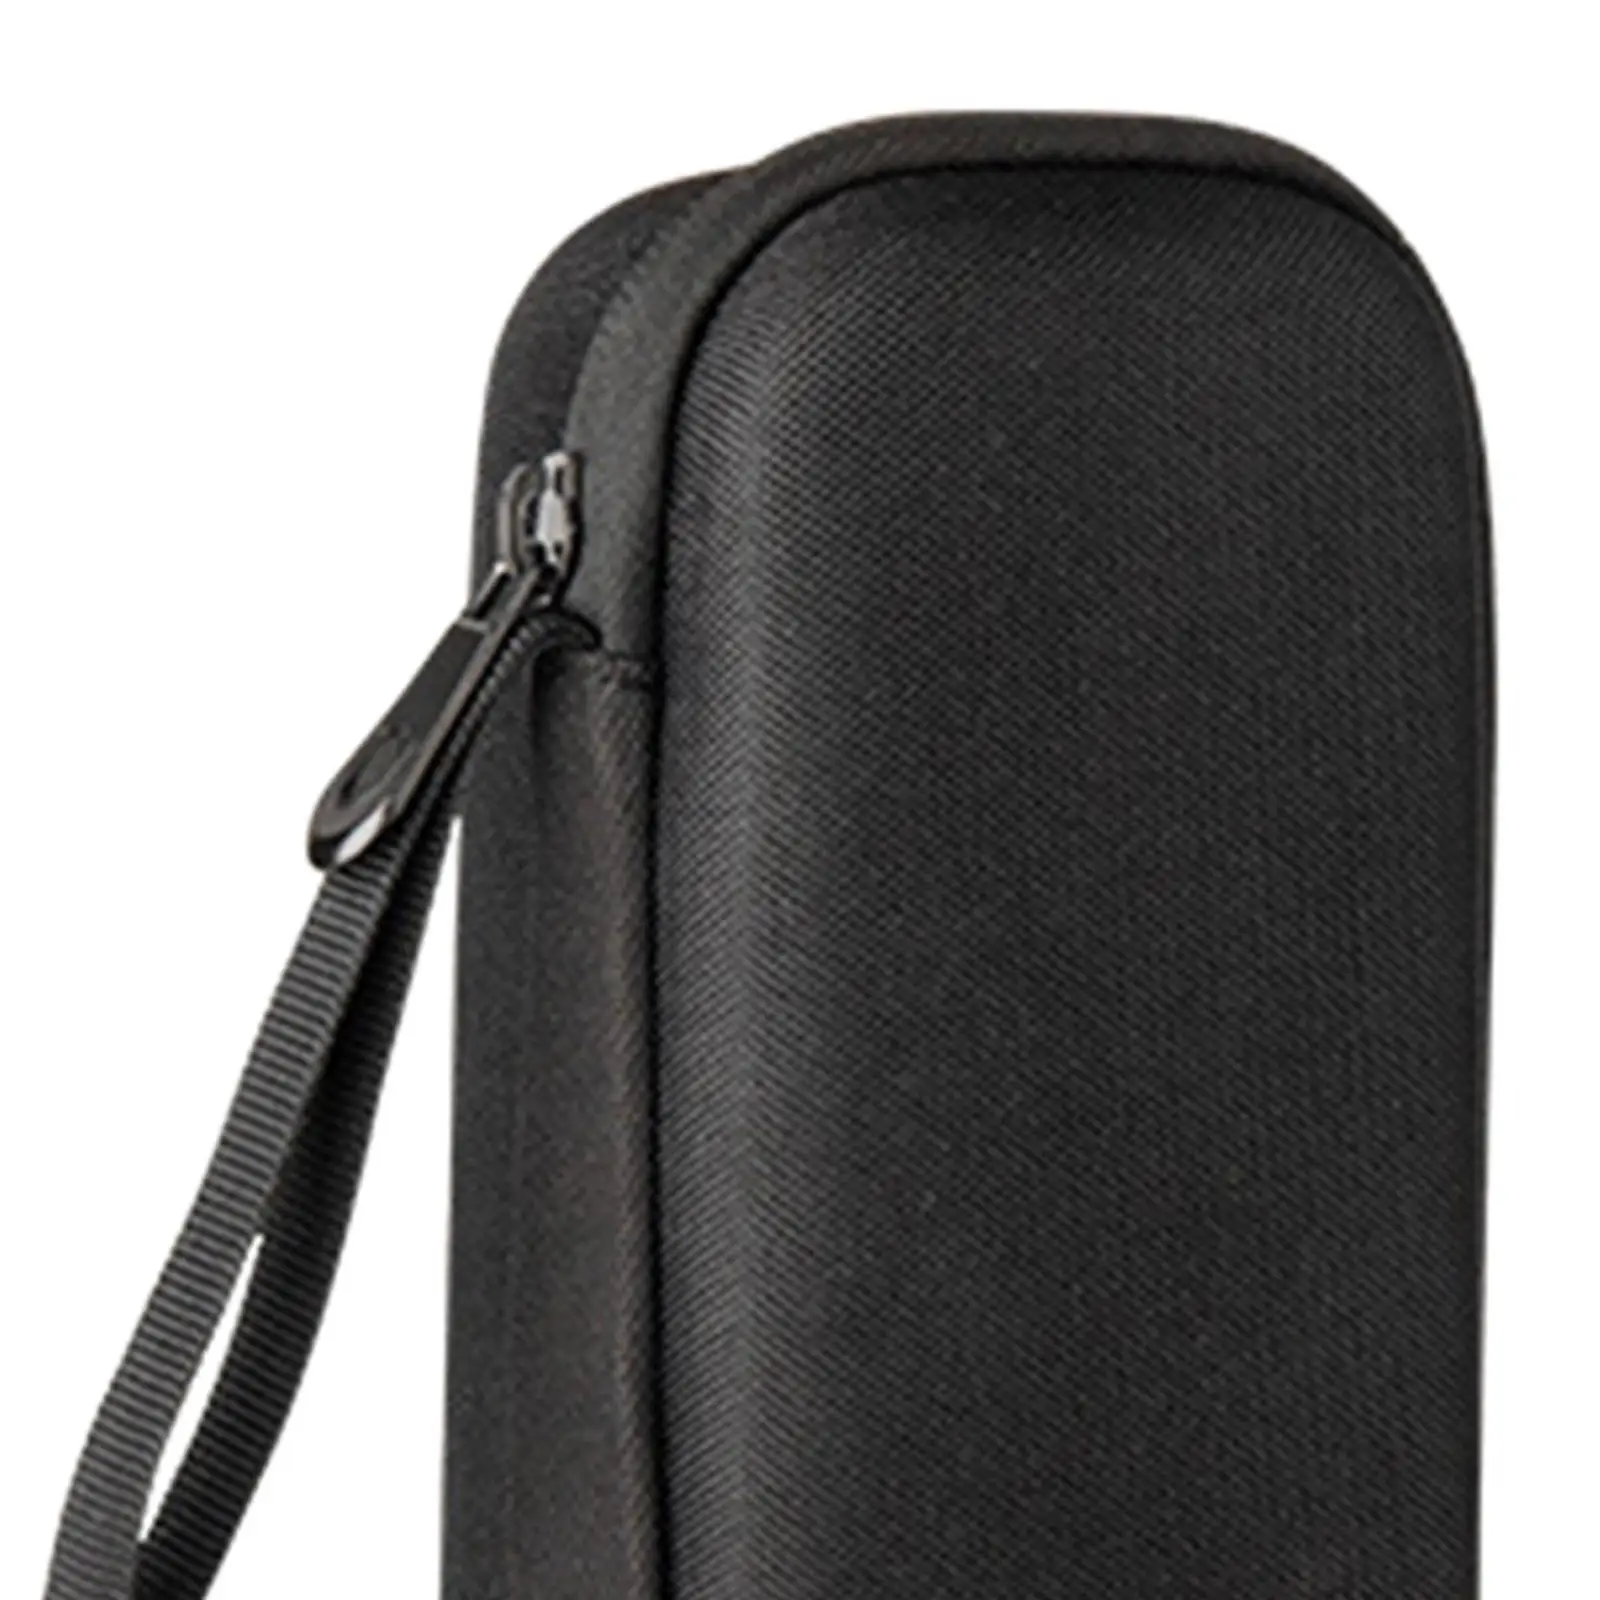 Hard Travel EVA Case Charger Carrying Case USB Cable Organizer Storage Pouch for Cord Cable Earphone Electronic Accessories